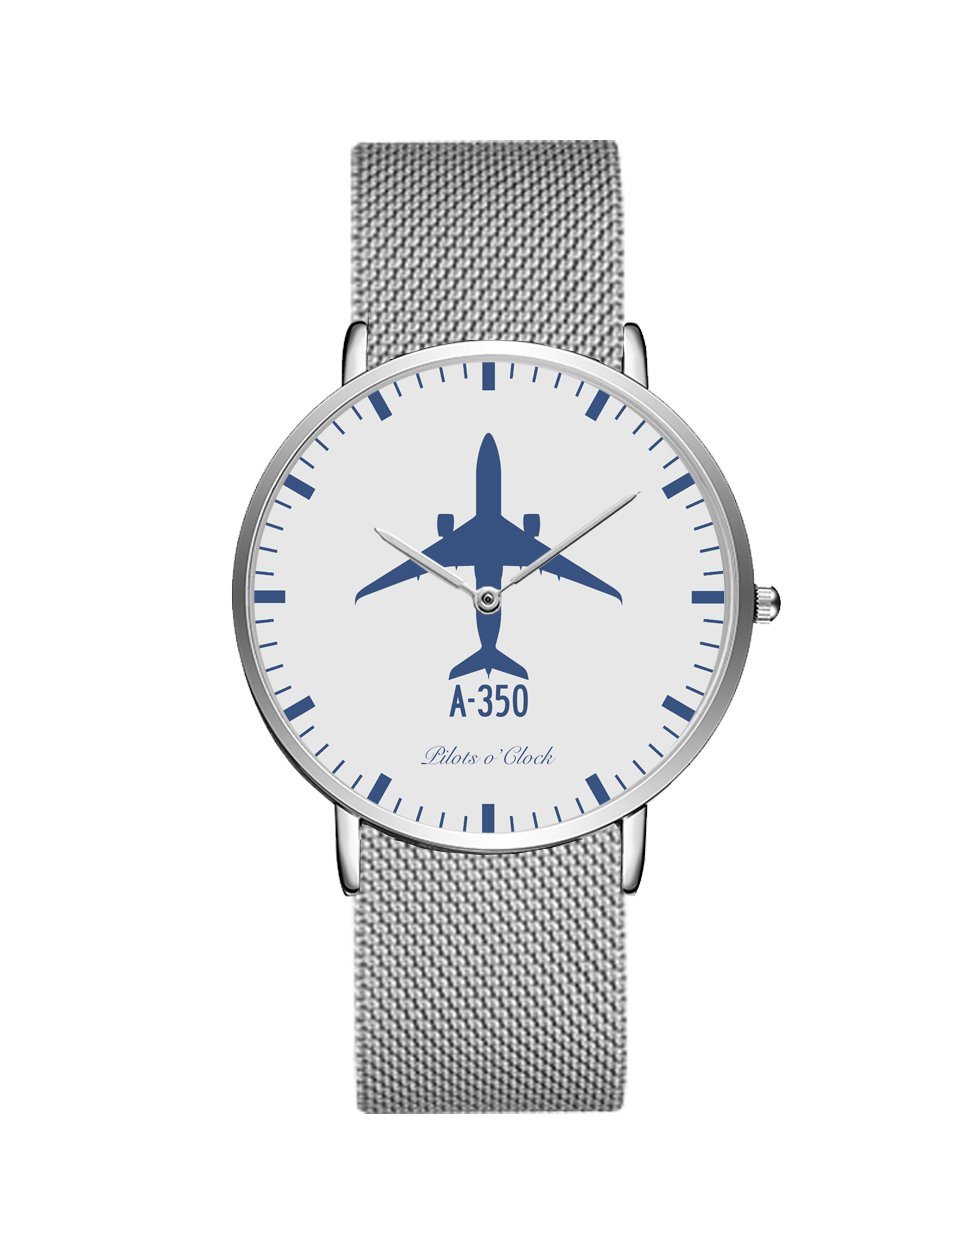 Airbus A350 Stainless Steel Strap Watches Pilot Eyes Store Silver & Silver Stainless Steel Strap 